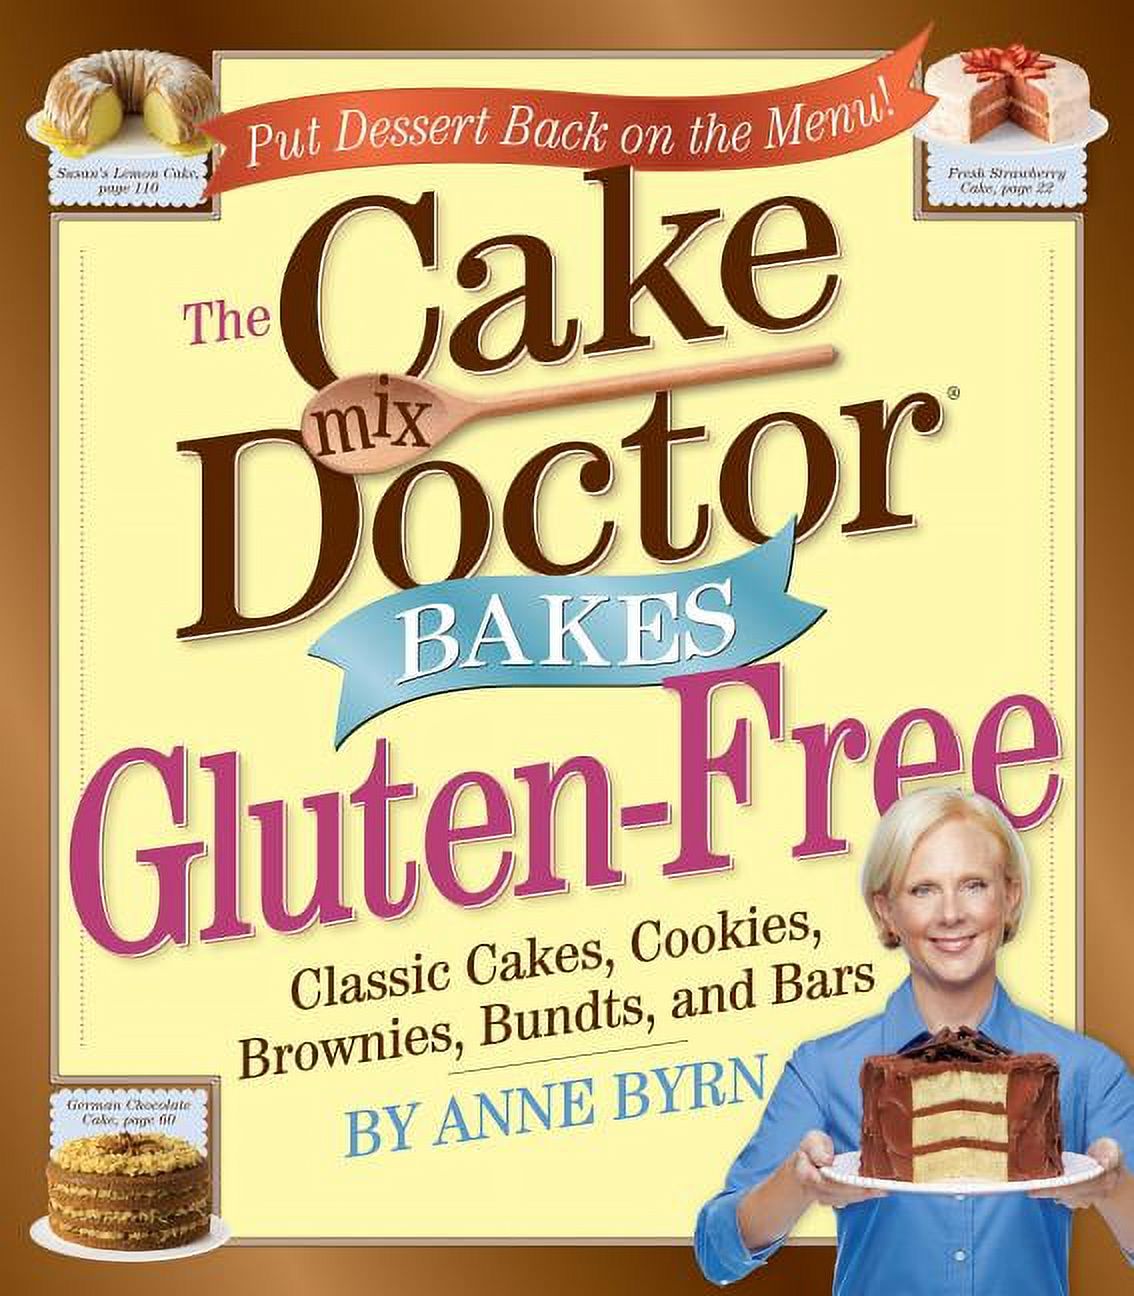 The Cake Mix Doctor Bakes Gluten-Free (Paperback) - image 1 of 1